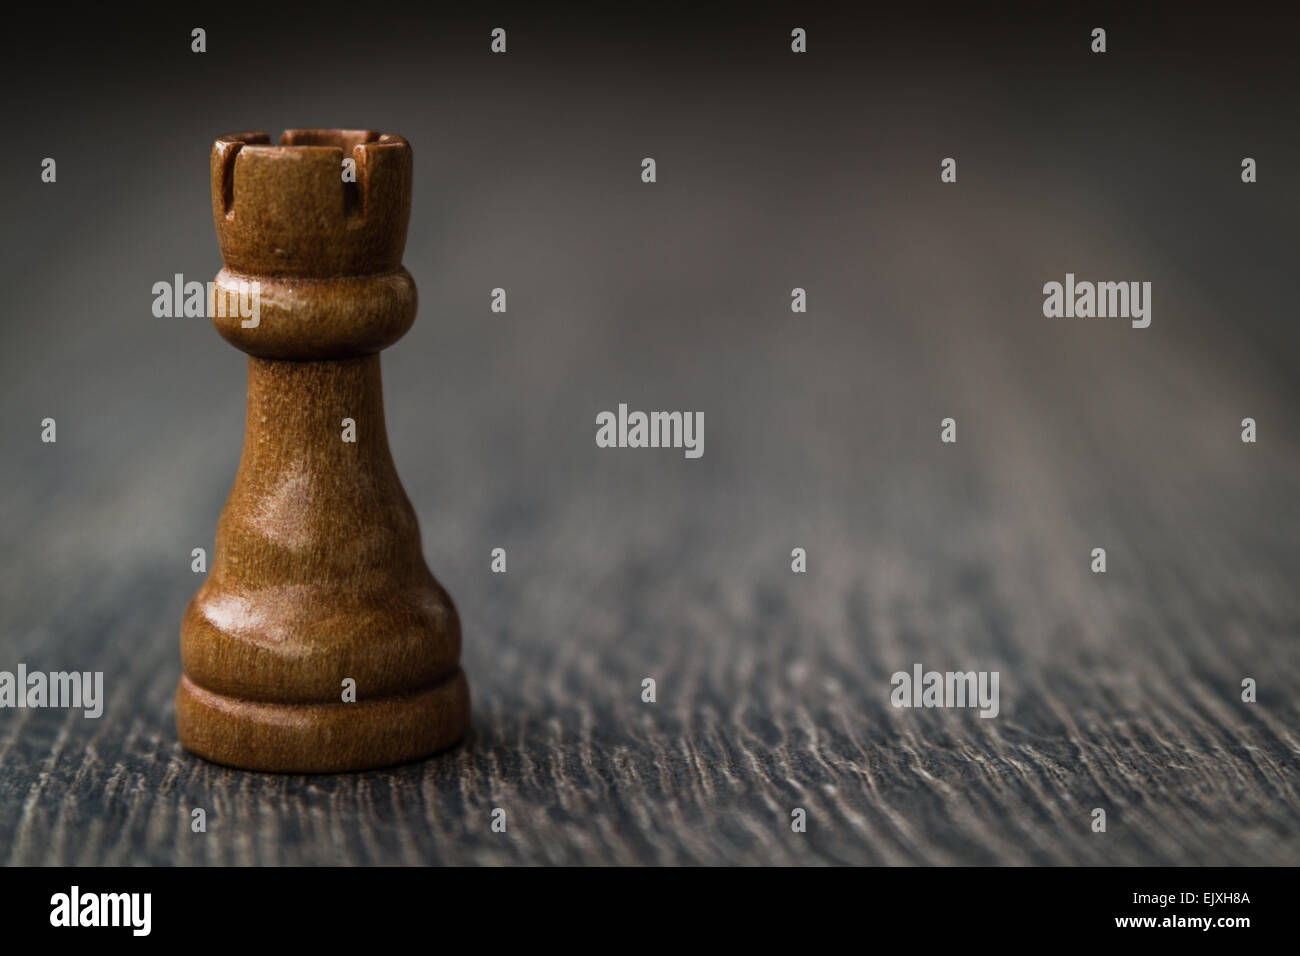 Chess Rook Stock Photos, Images and Backgrounds for Free Download